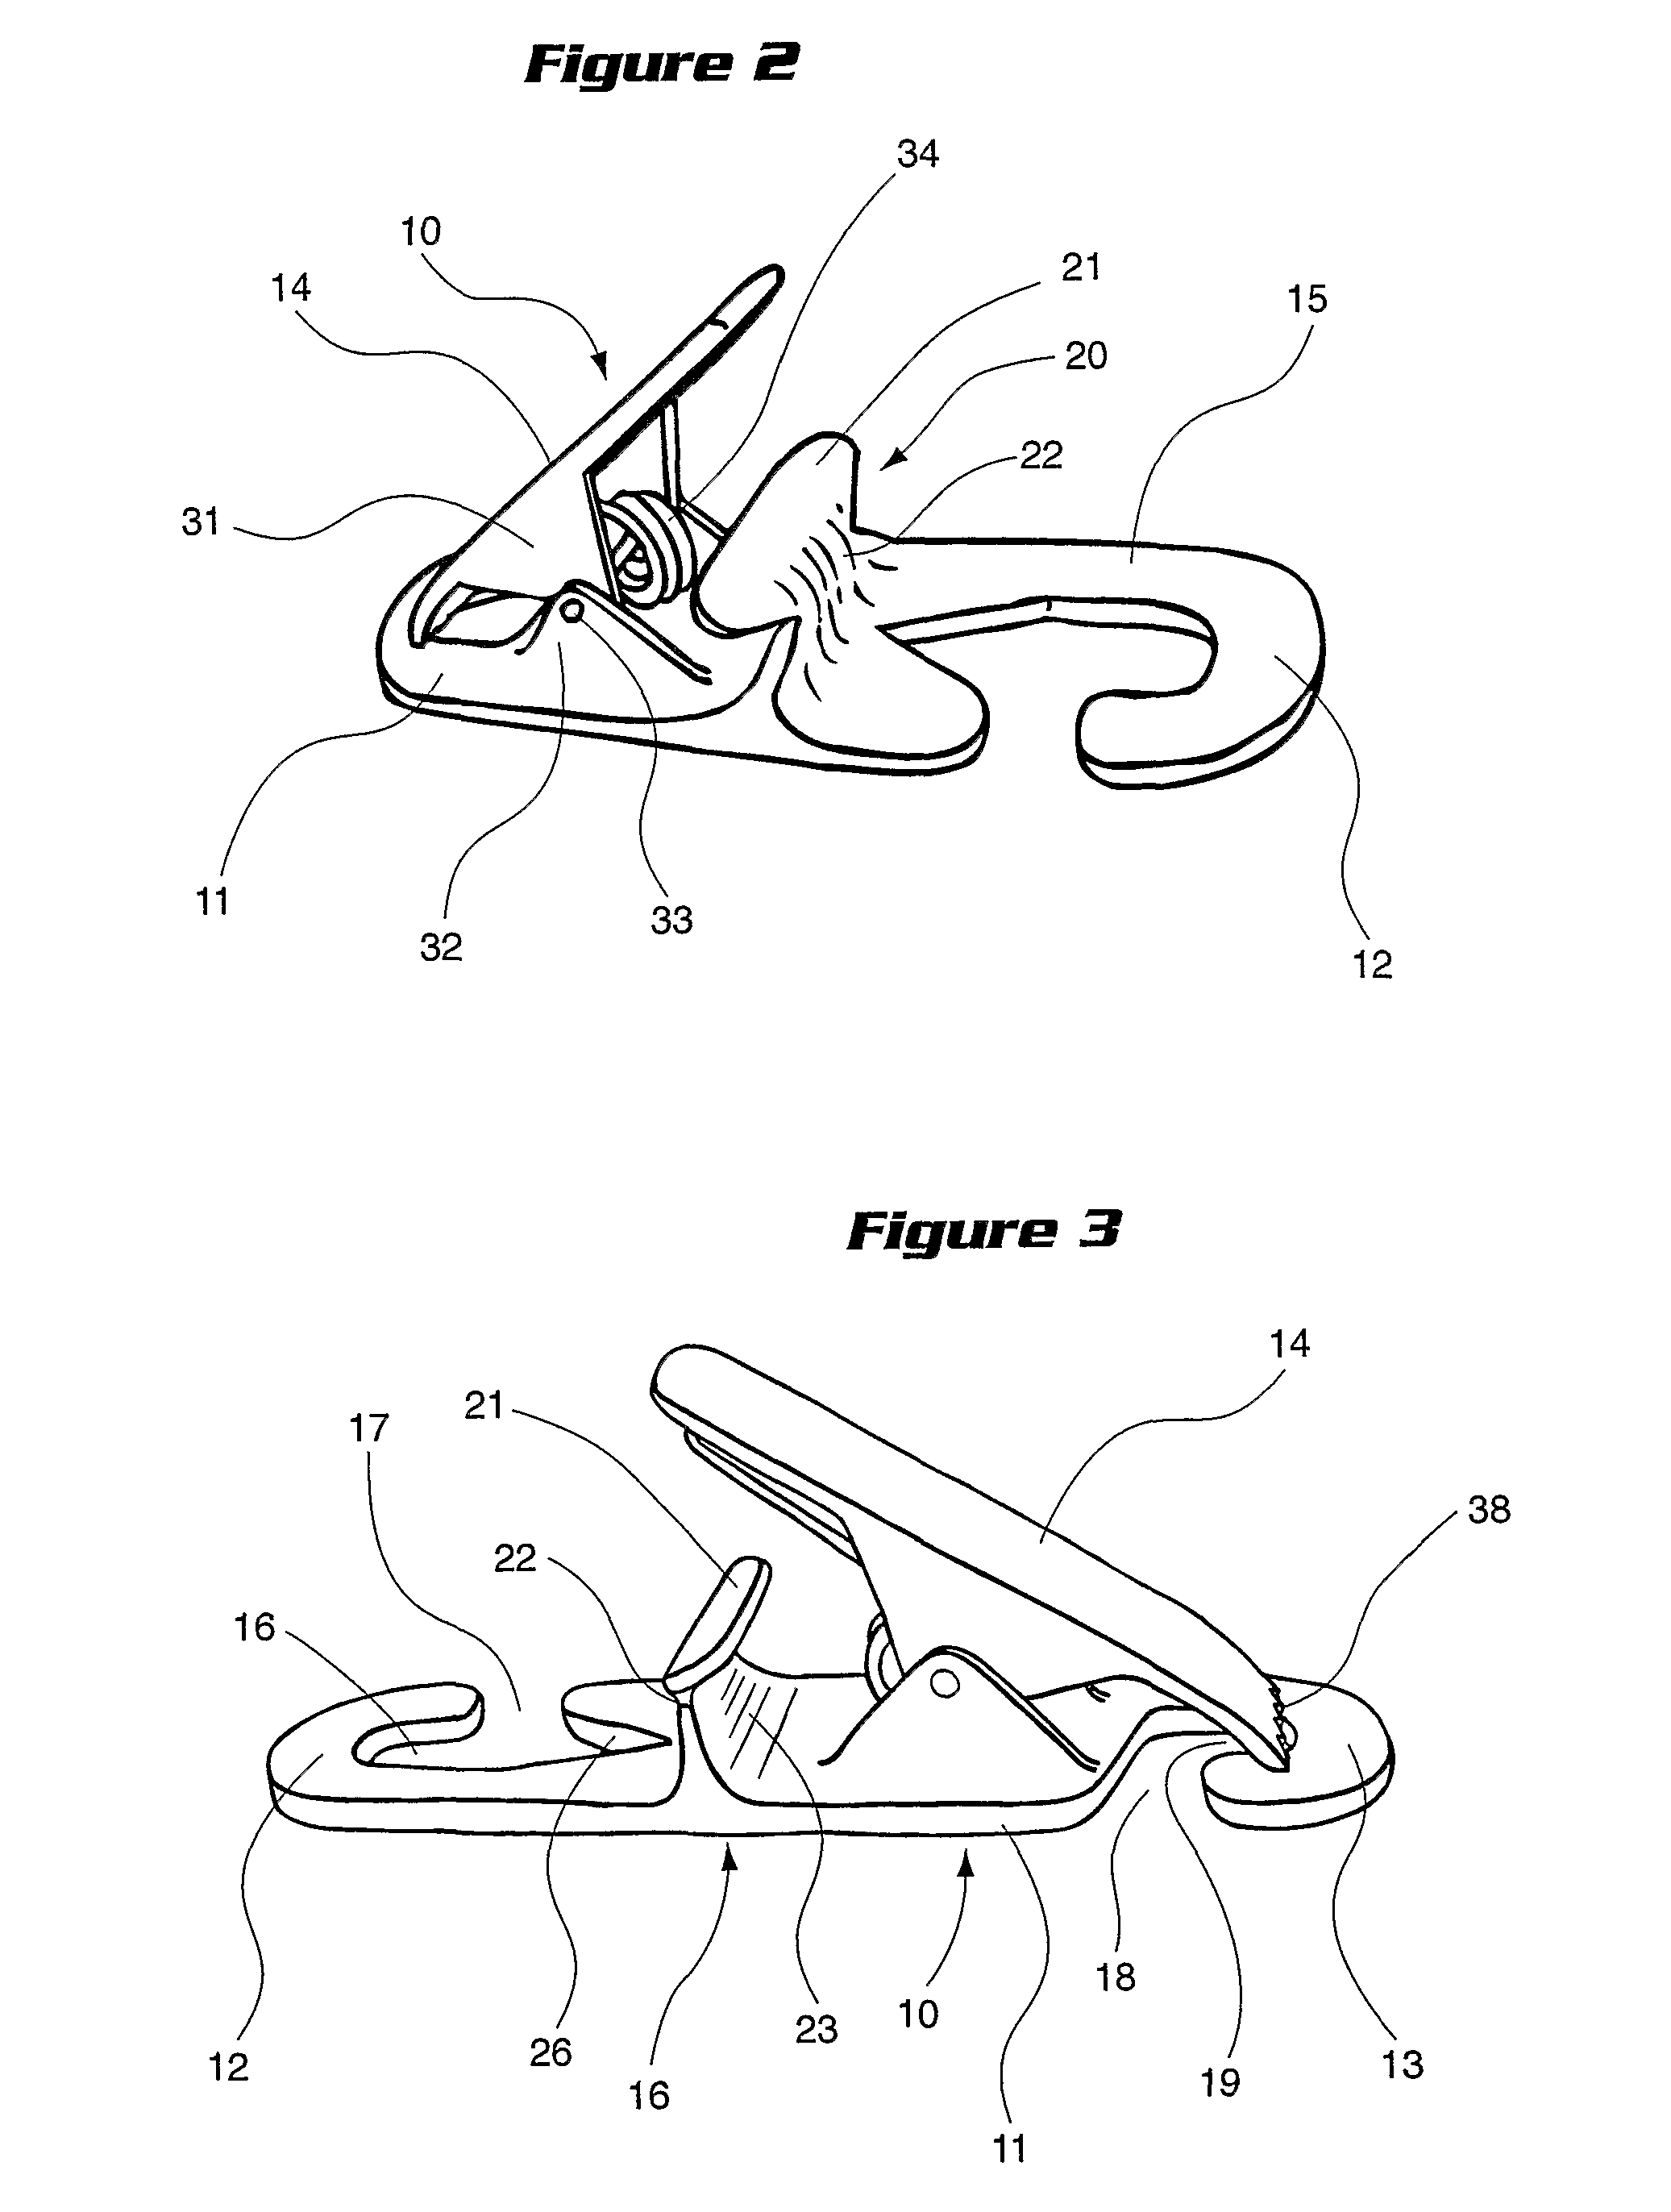 Rope tensioning device